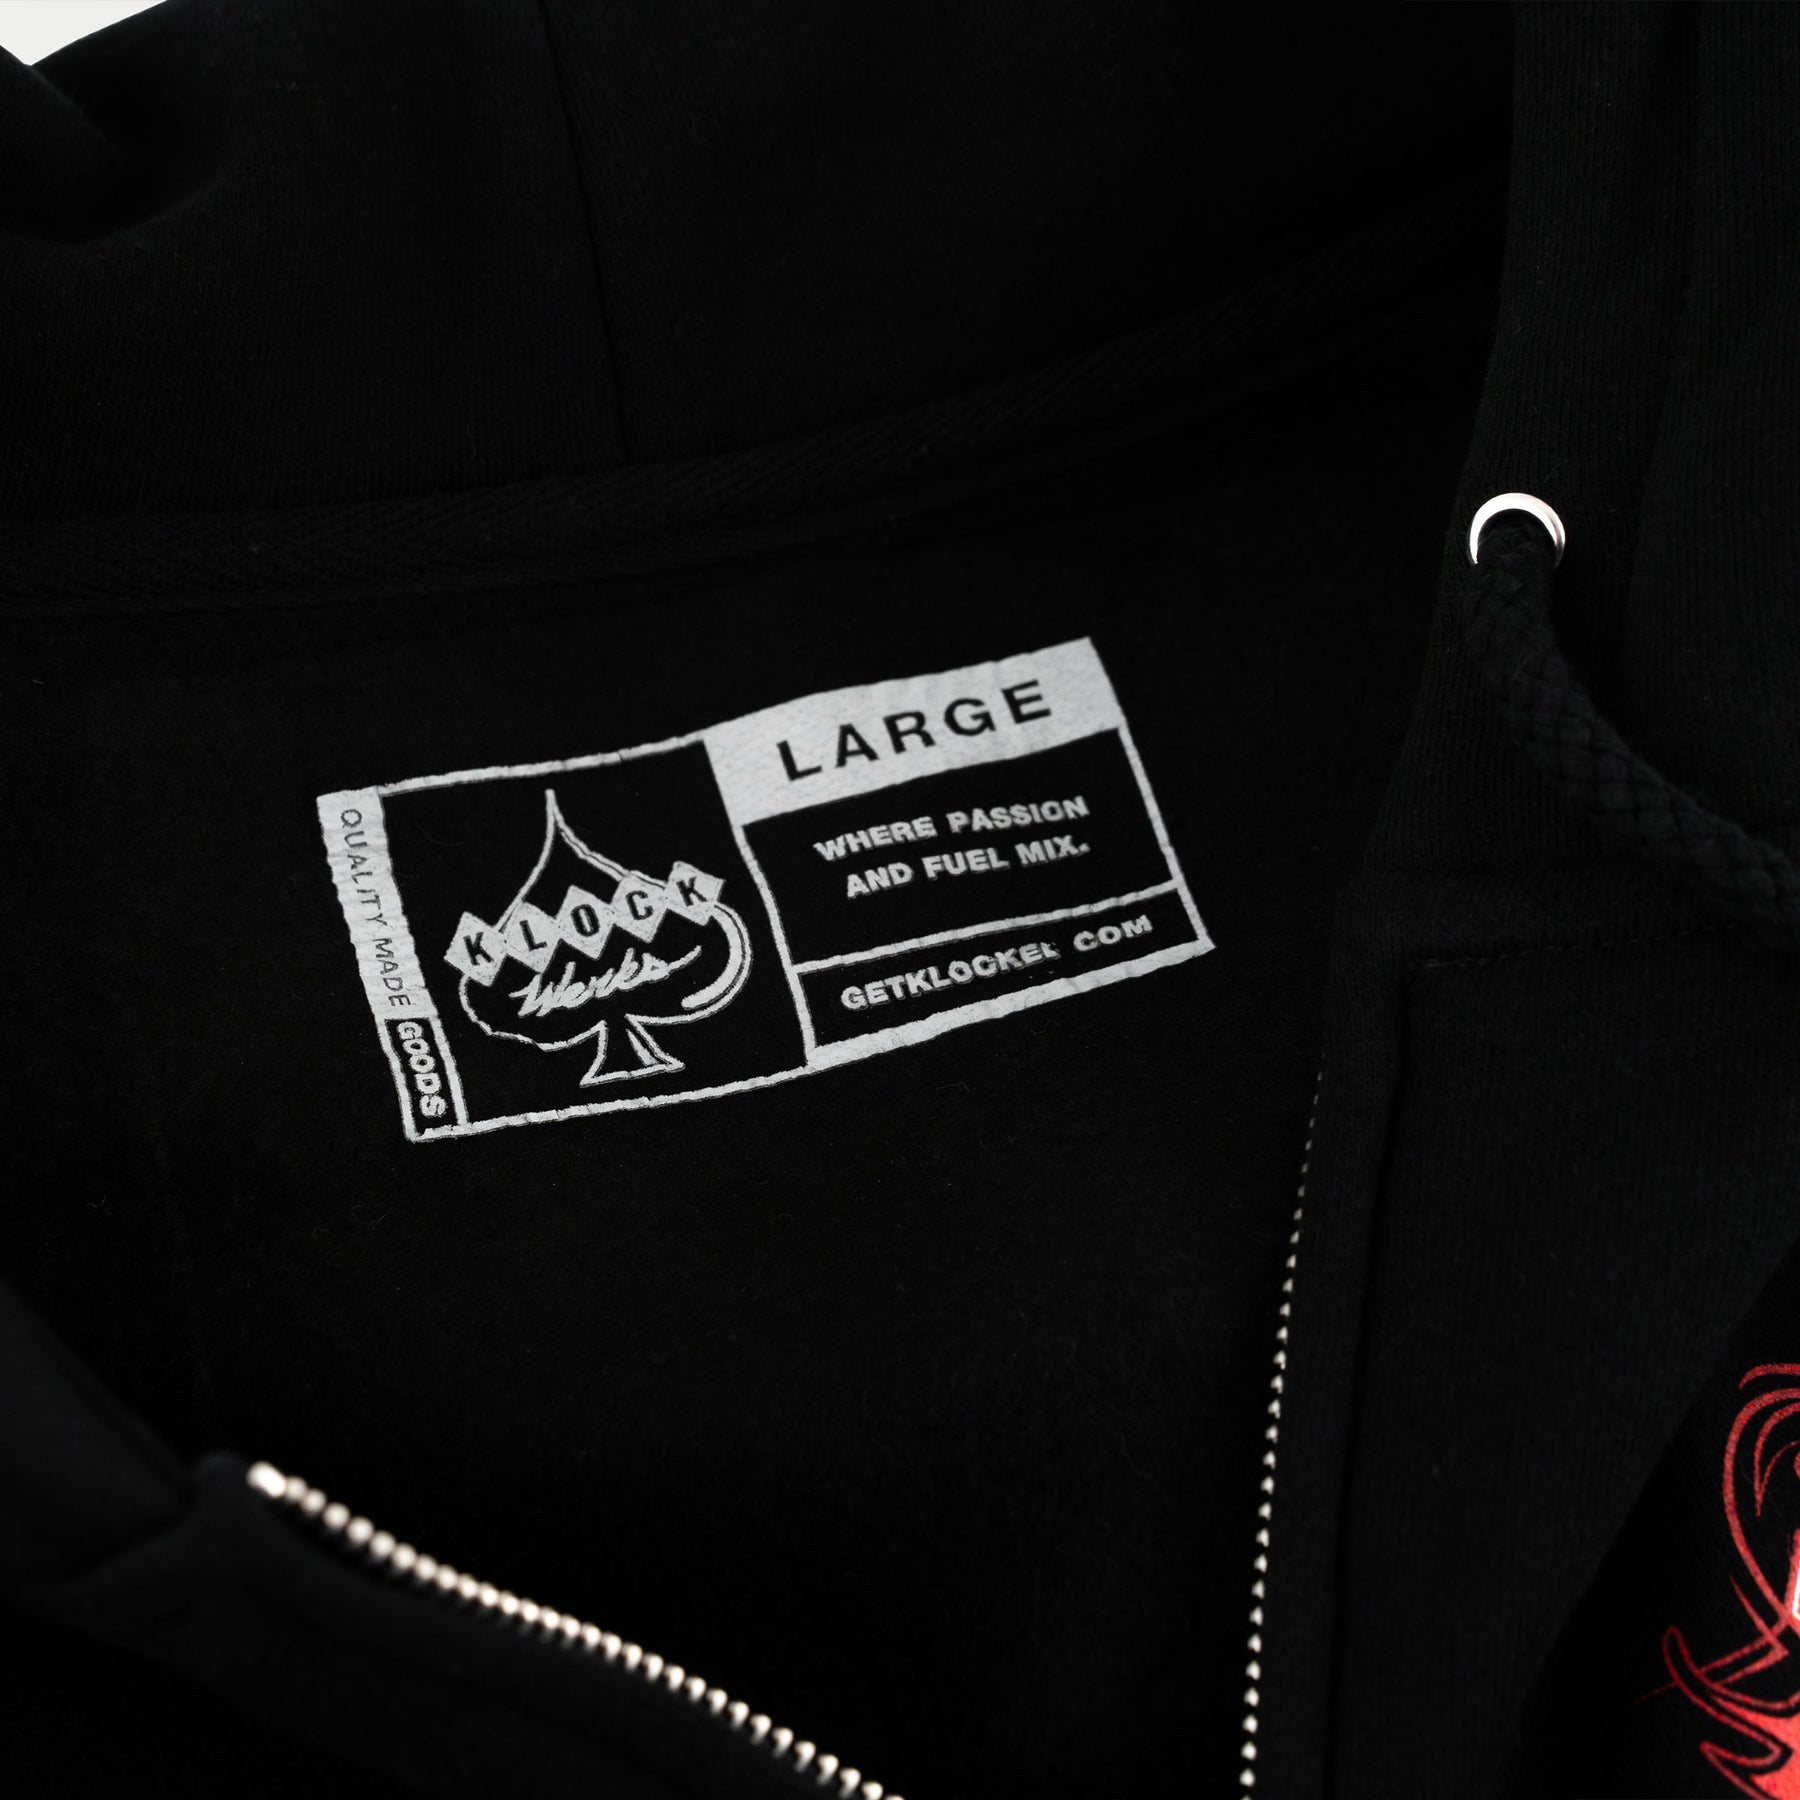 Spark Plug Design on Black Zip-Up Hoodie showin neck tag printed with size